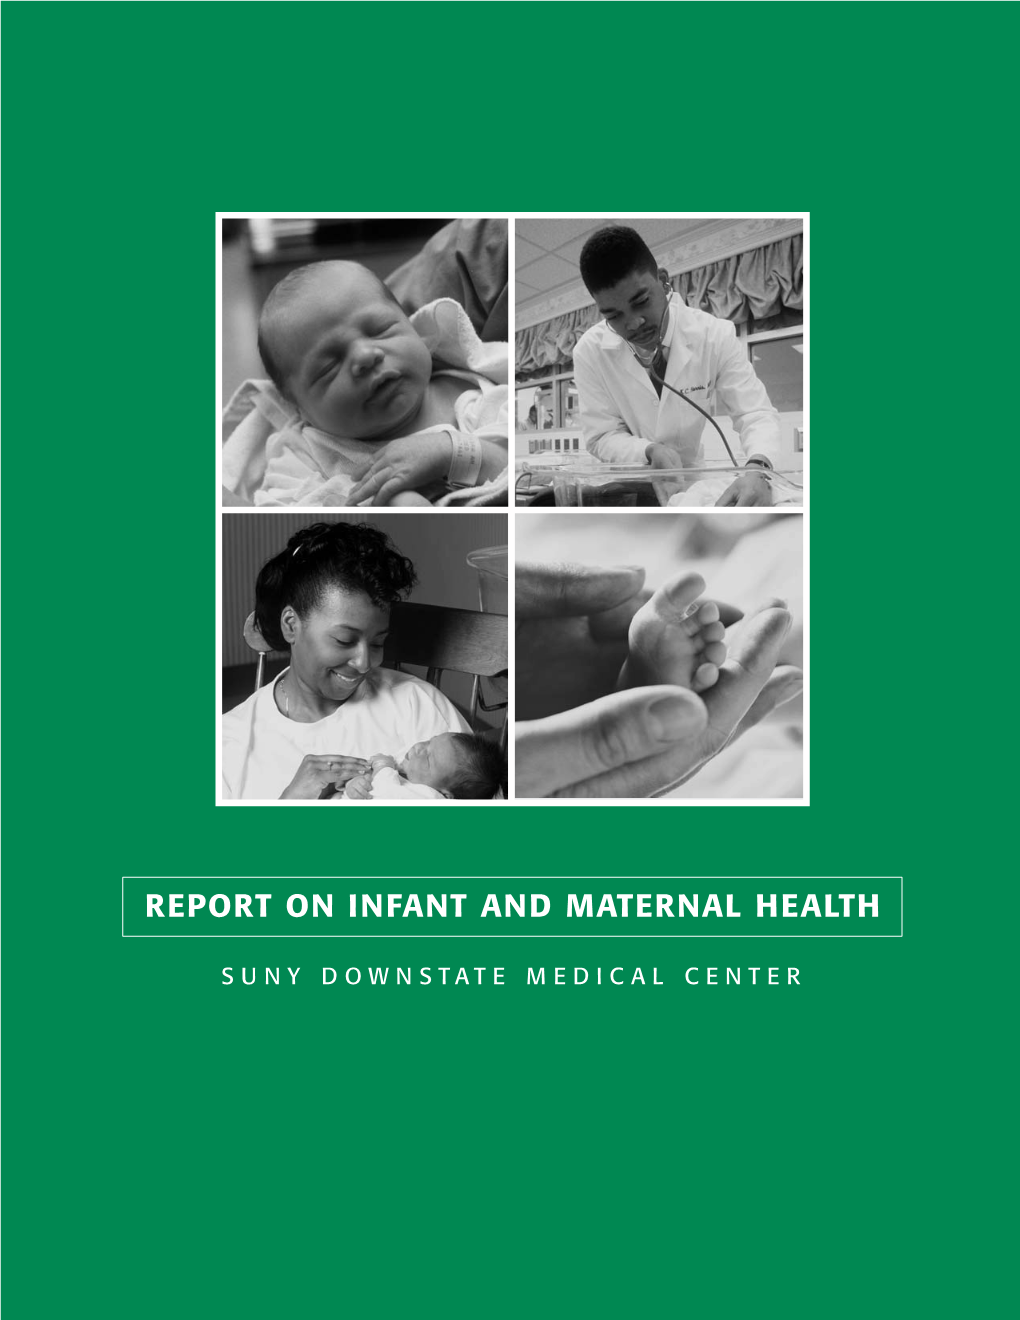 Report on Infant and Maternal Health